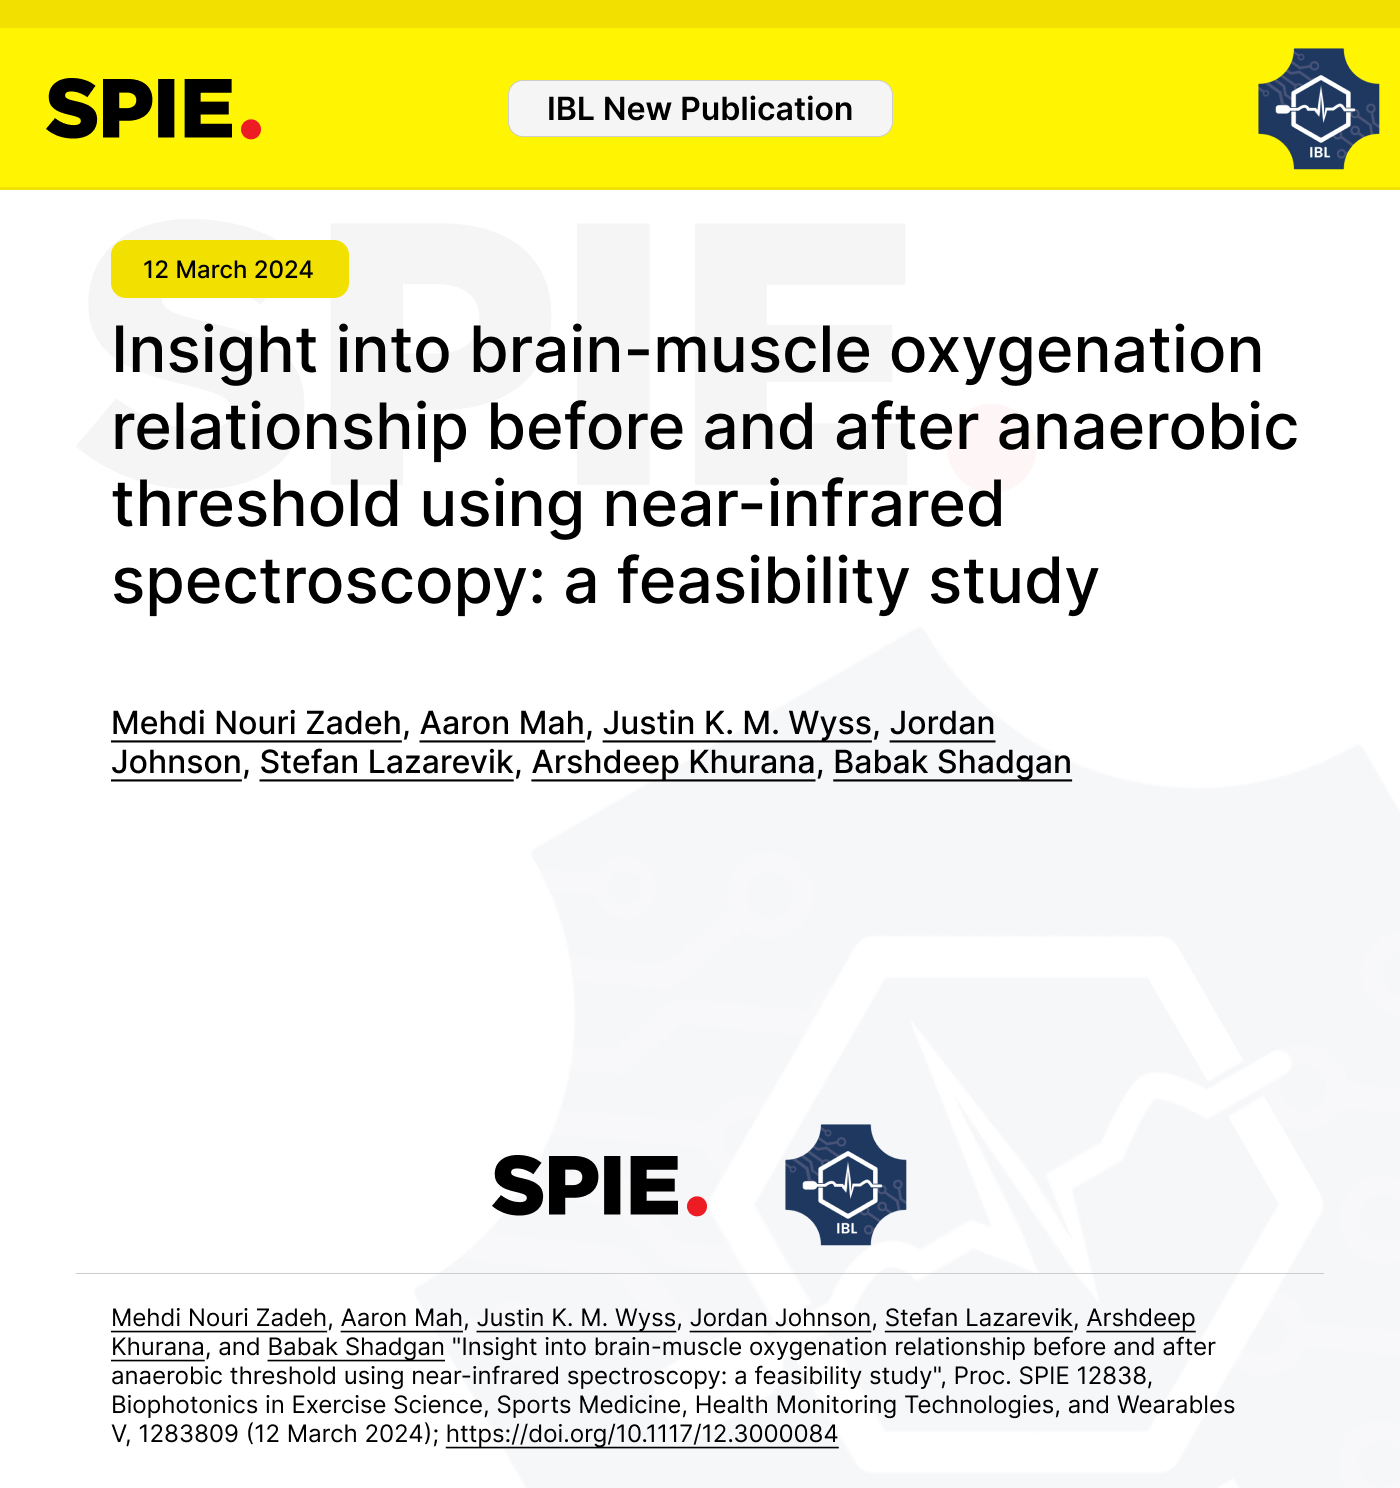 New Publication: Insight into brain-muscle oxygenation relationship before and after anaerobic threshold using near-infrared spectroscopy – a feasibility study